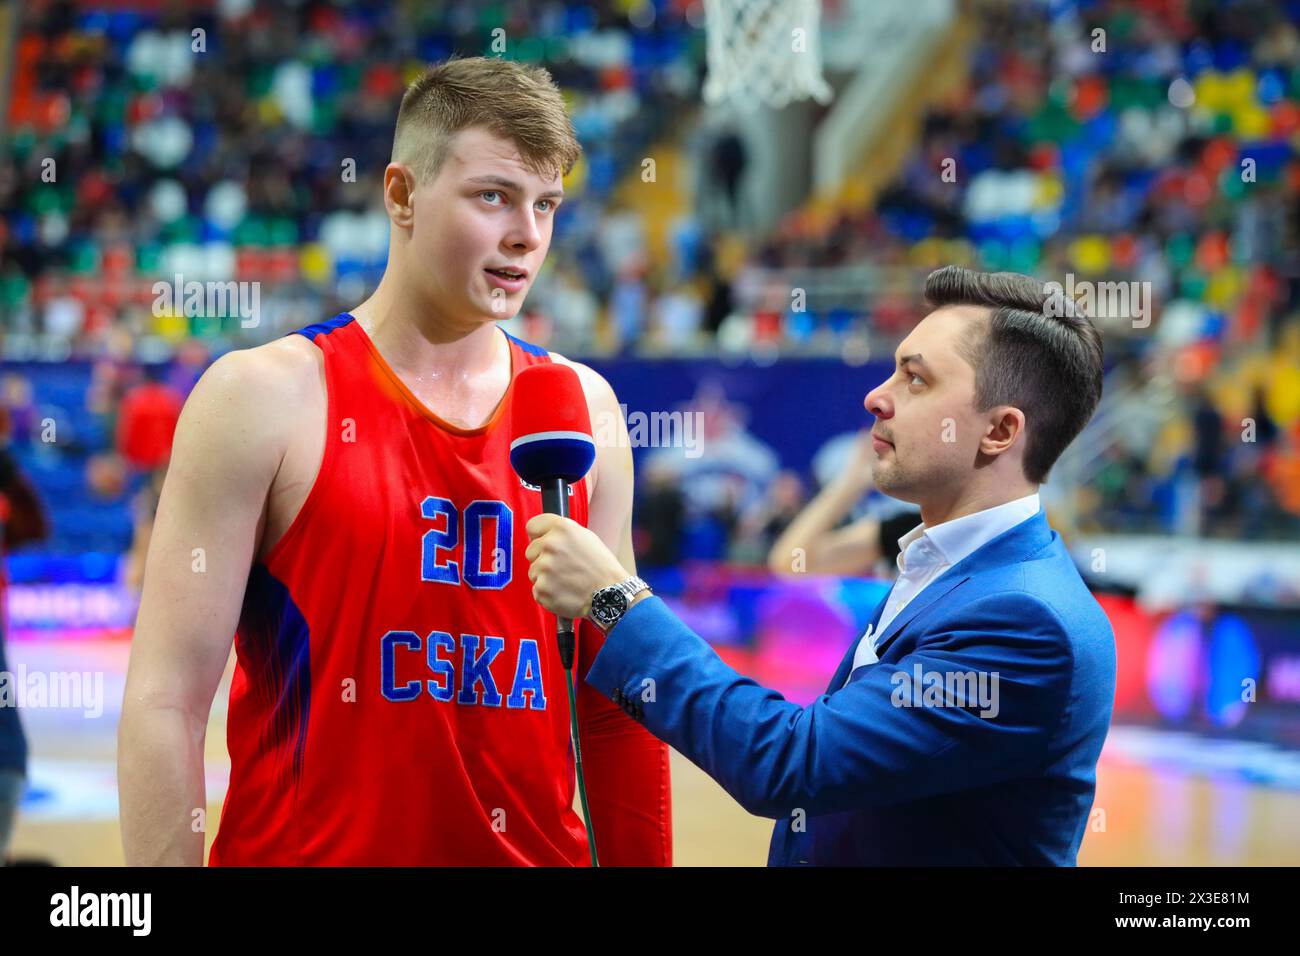 Interview with basketball player at basketball game in stadium Stock Photo